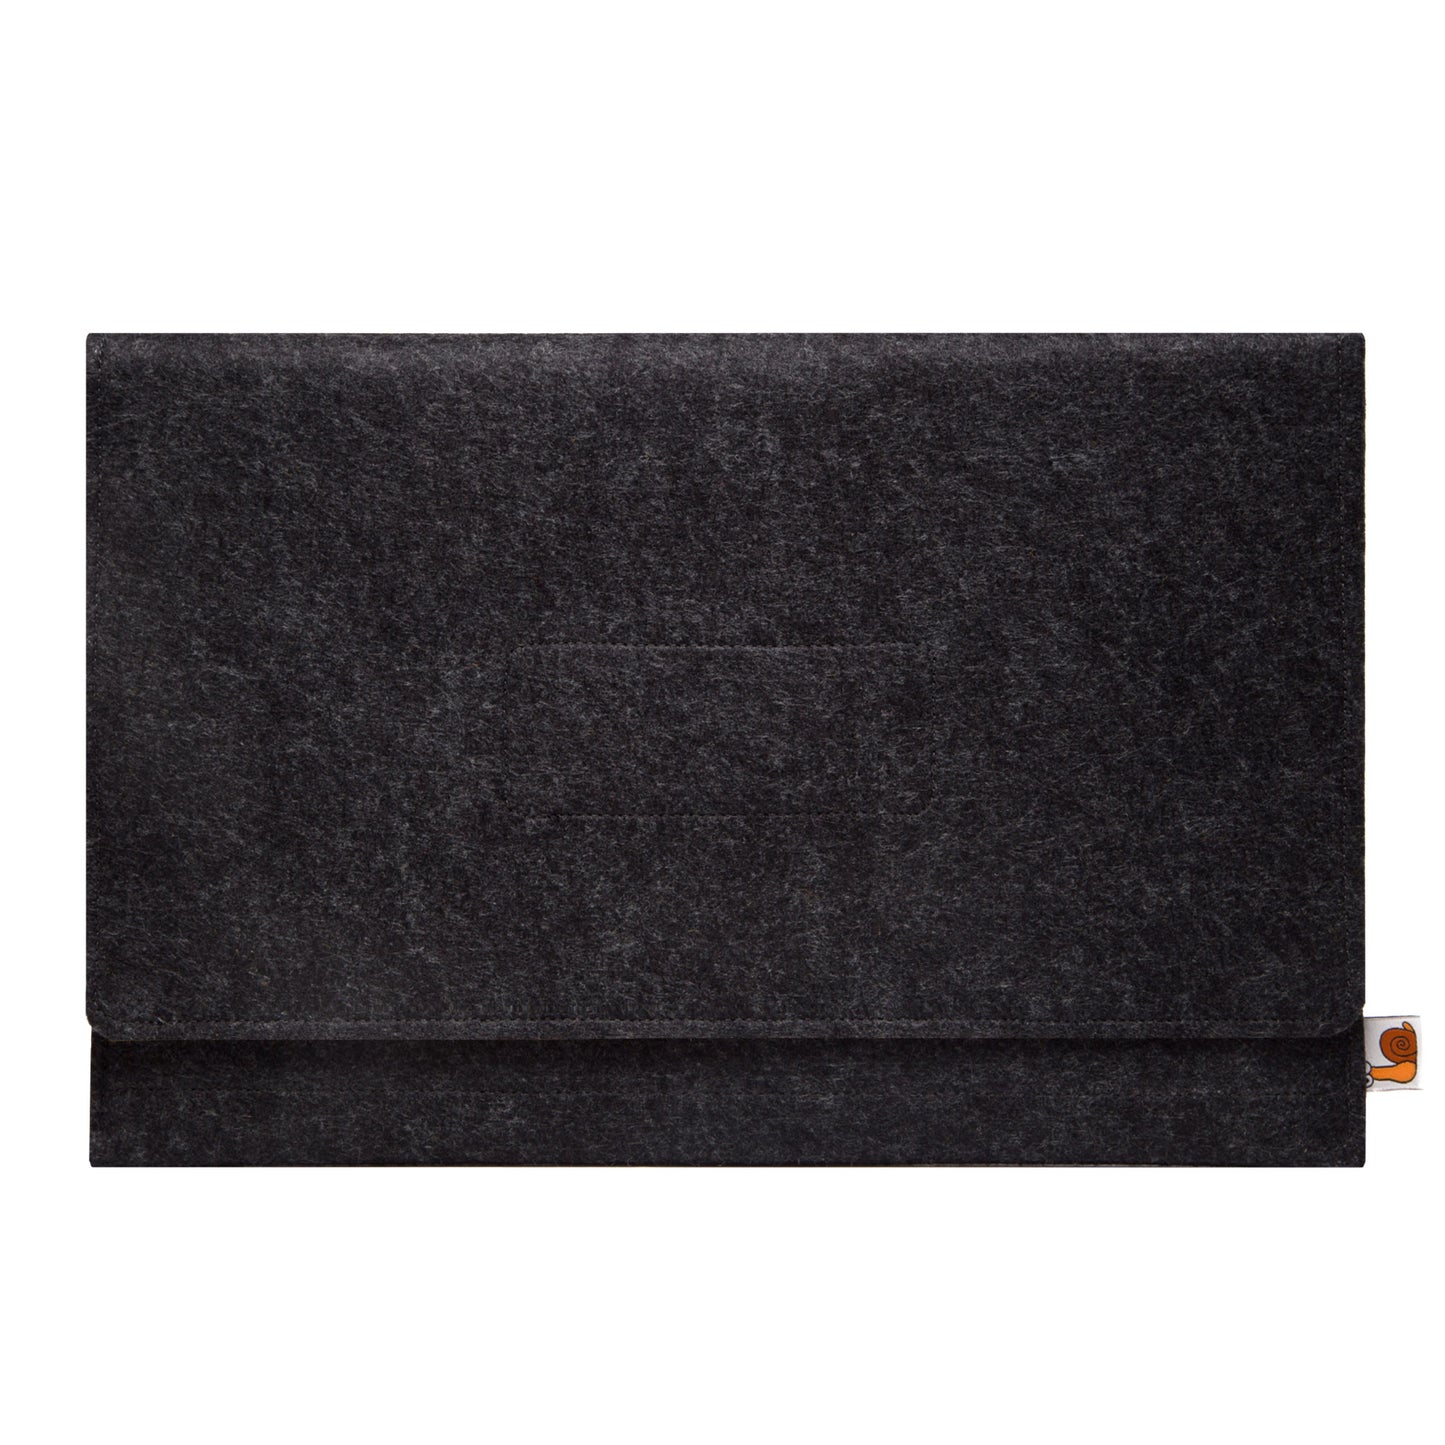 Premium Felt iPad Cover: Ultimate Protection with Accessories Pocket - Charcoal & Lime